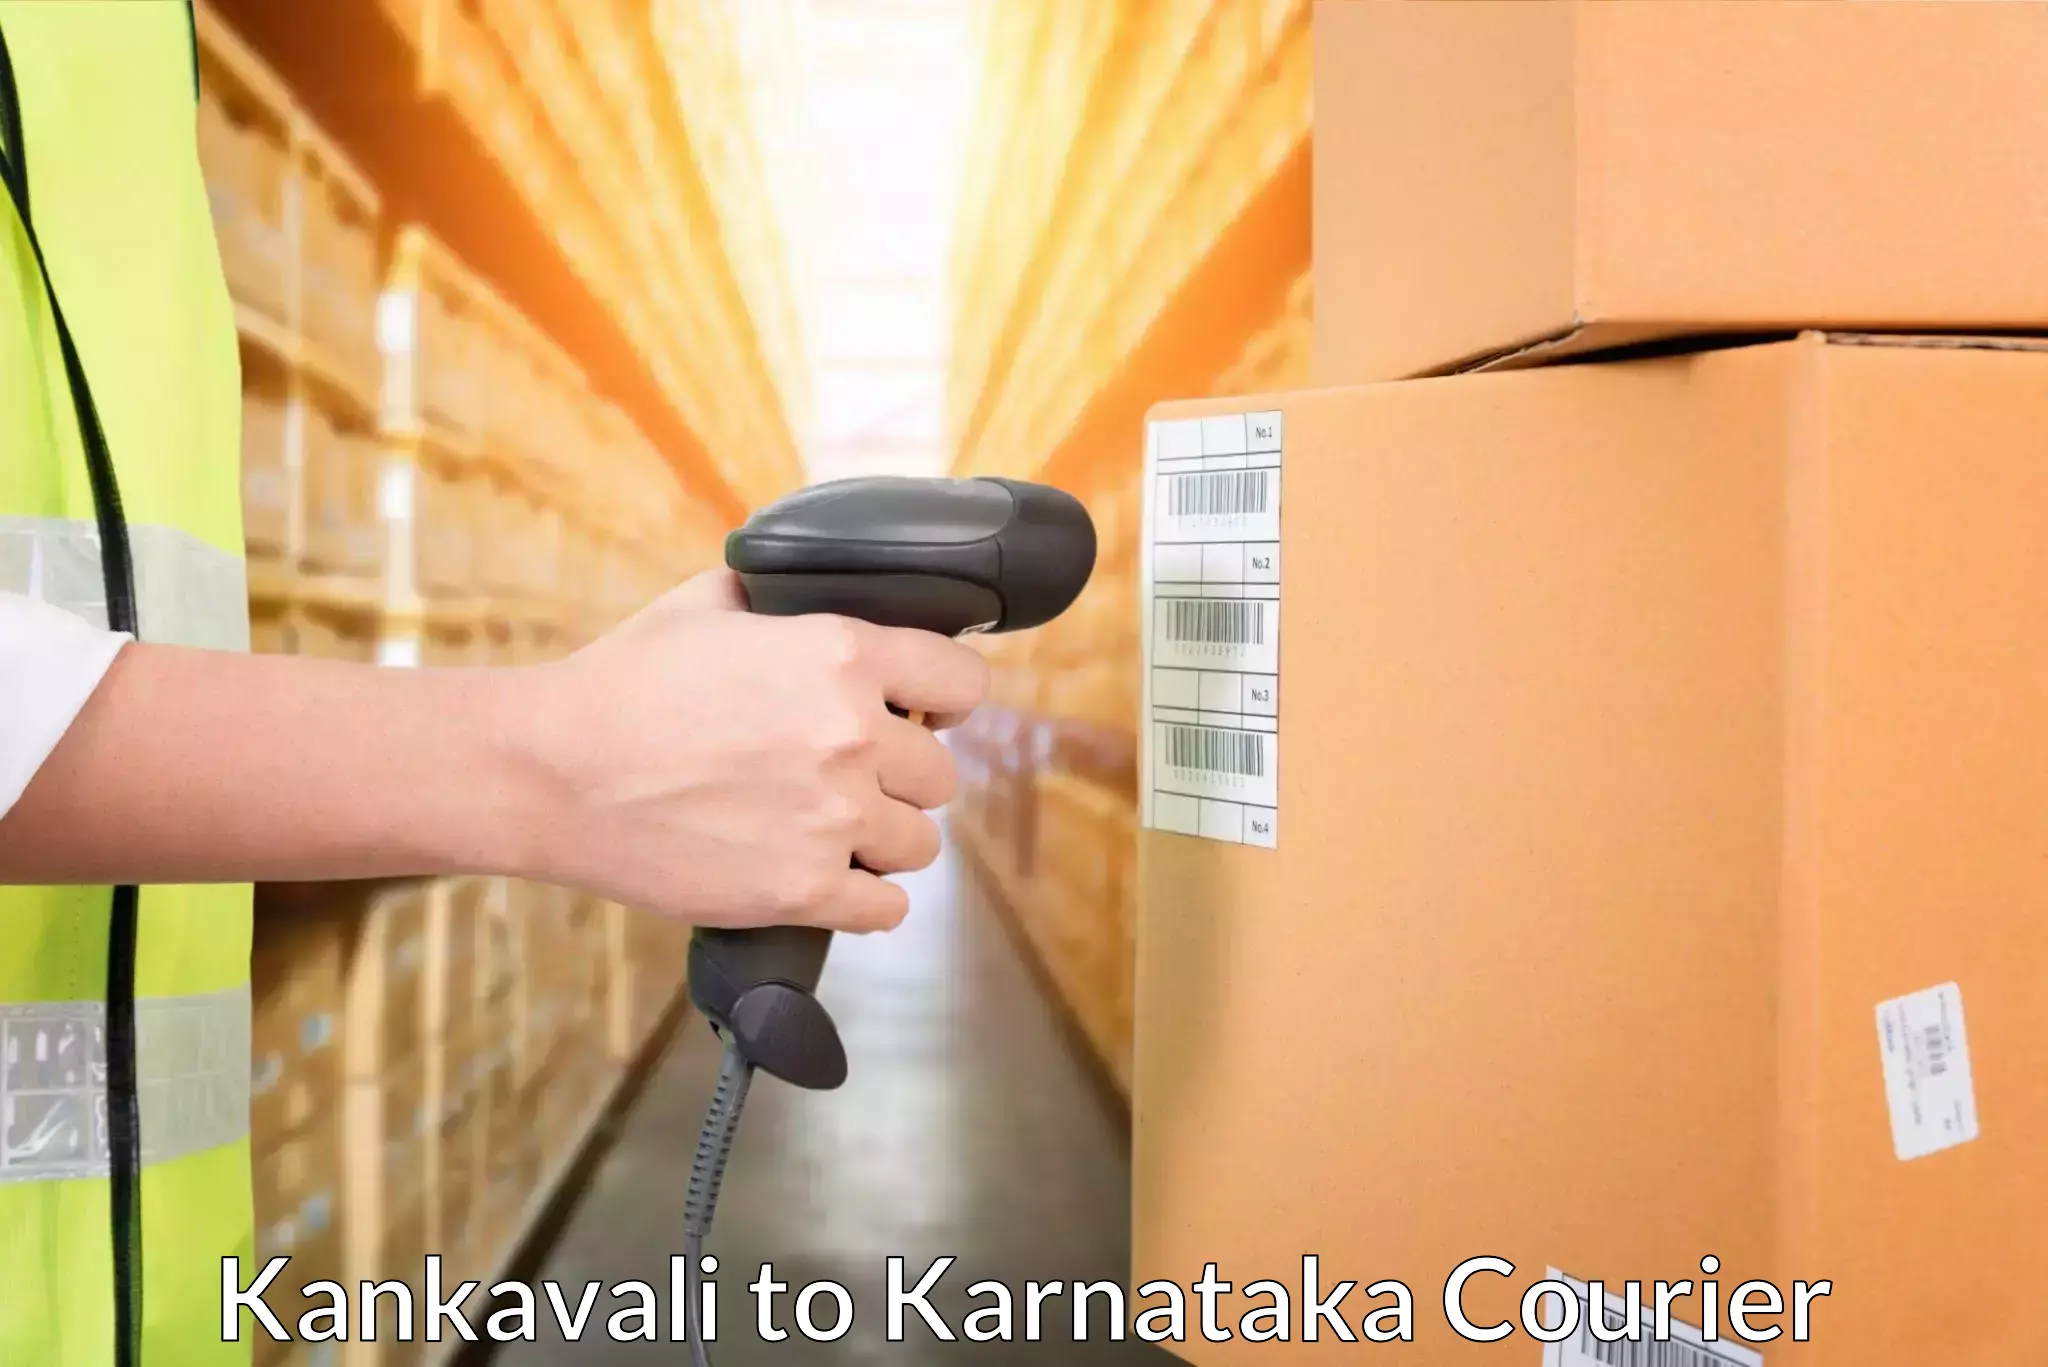 Efficient order fulfillment Kankavali to Indian Institute of Science Bangalore